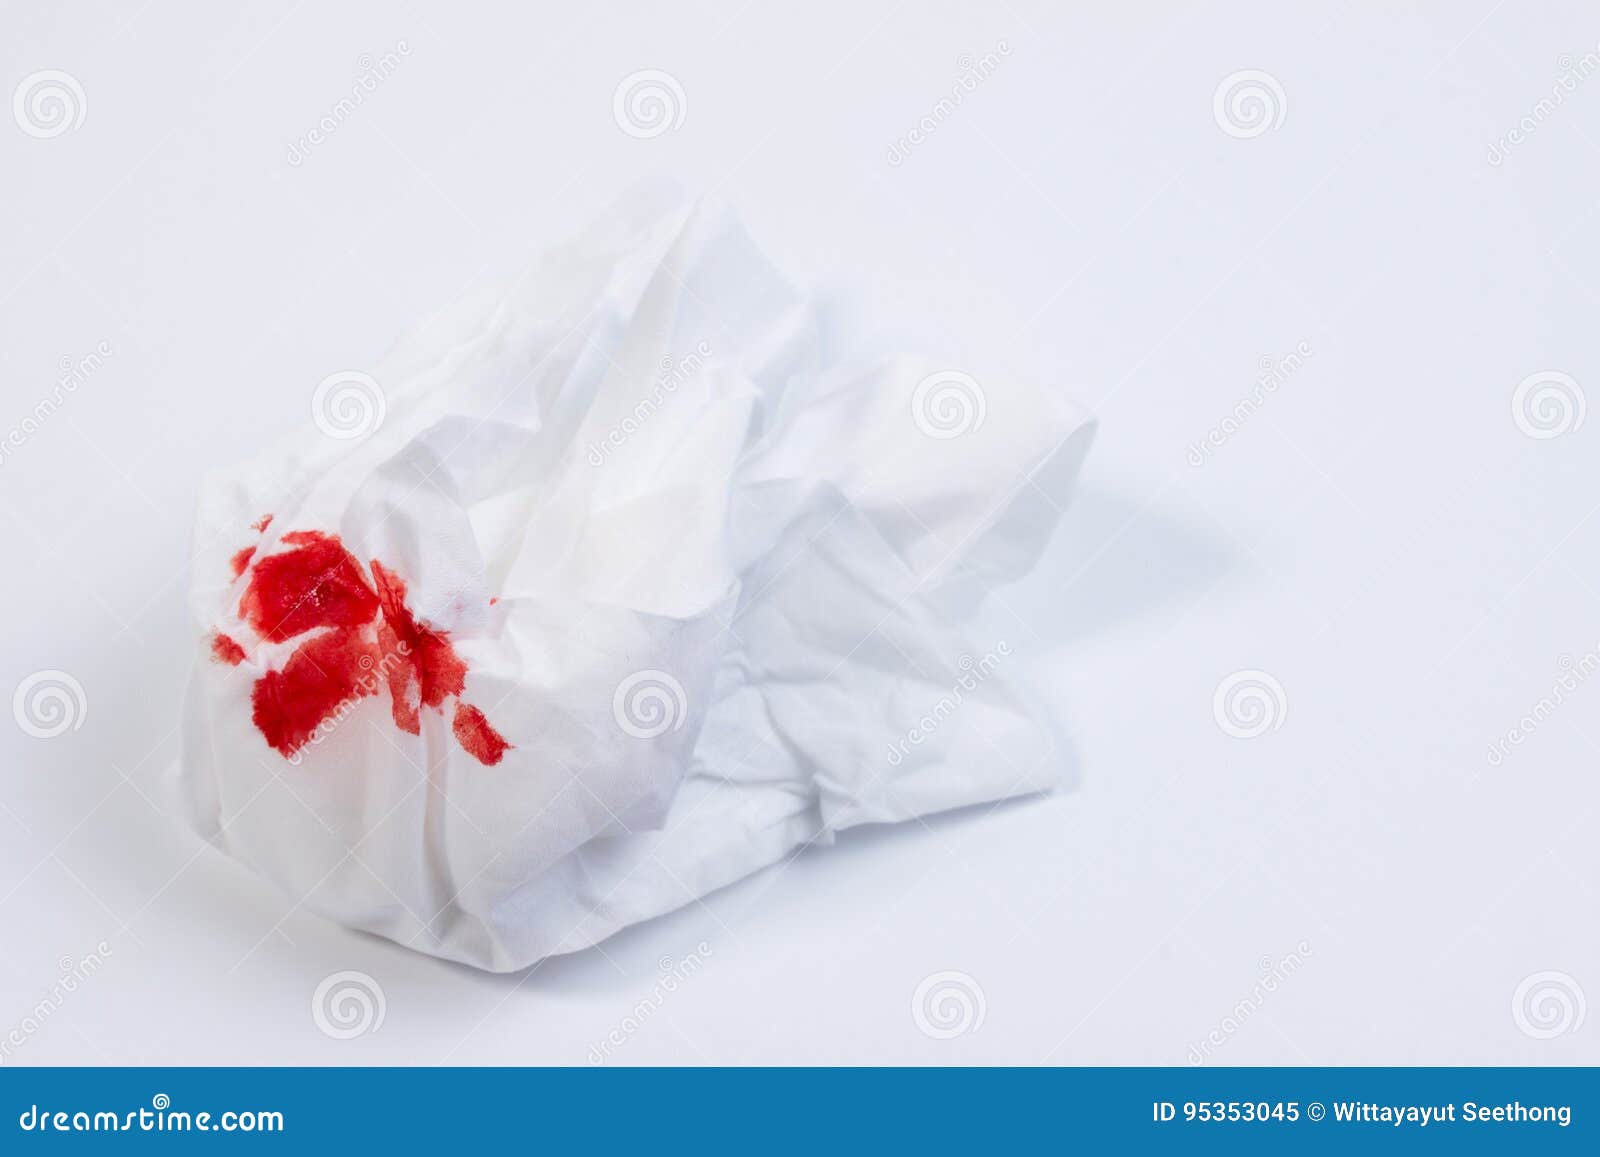 170 Blood Tissue Paper Photos Free Royalty Free Stock Photos From Dreamstime